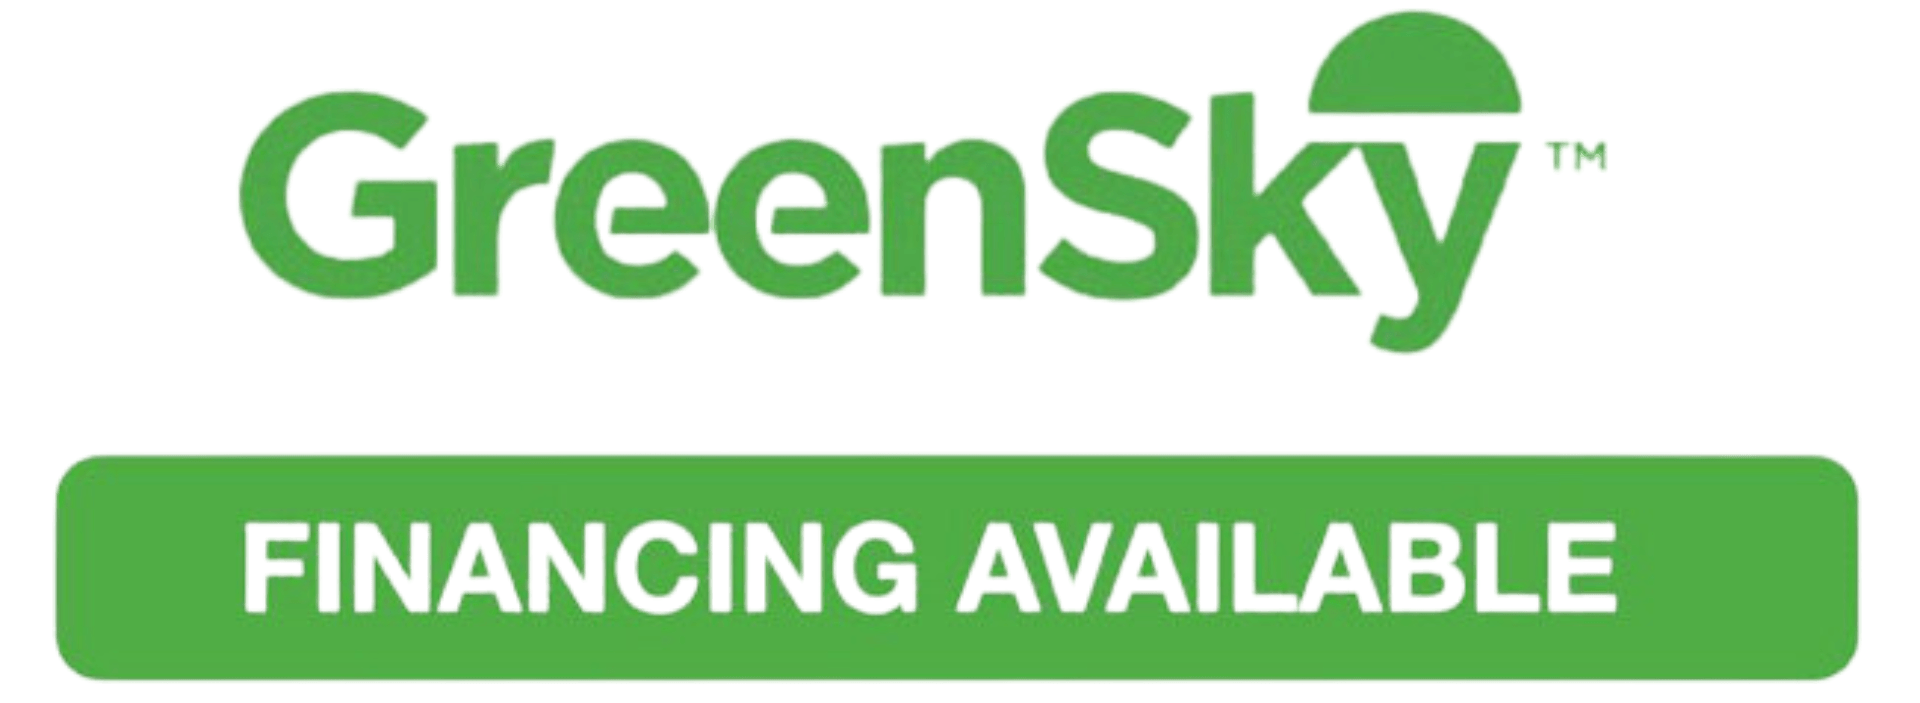 A green sky logo that says financing available